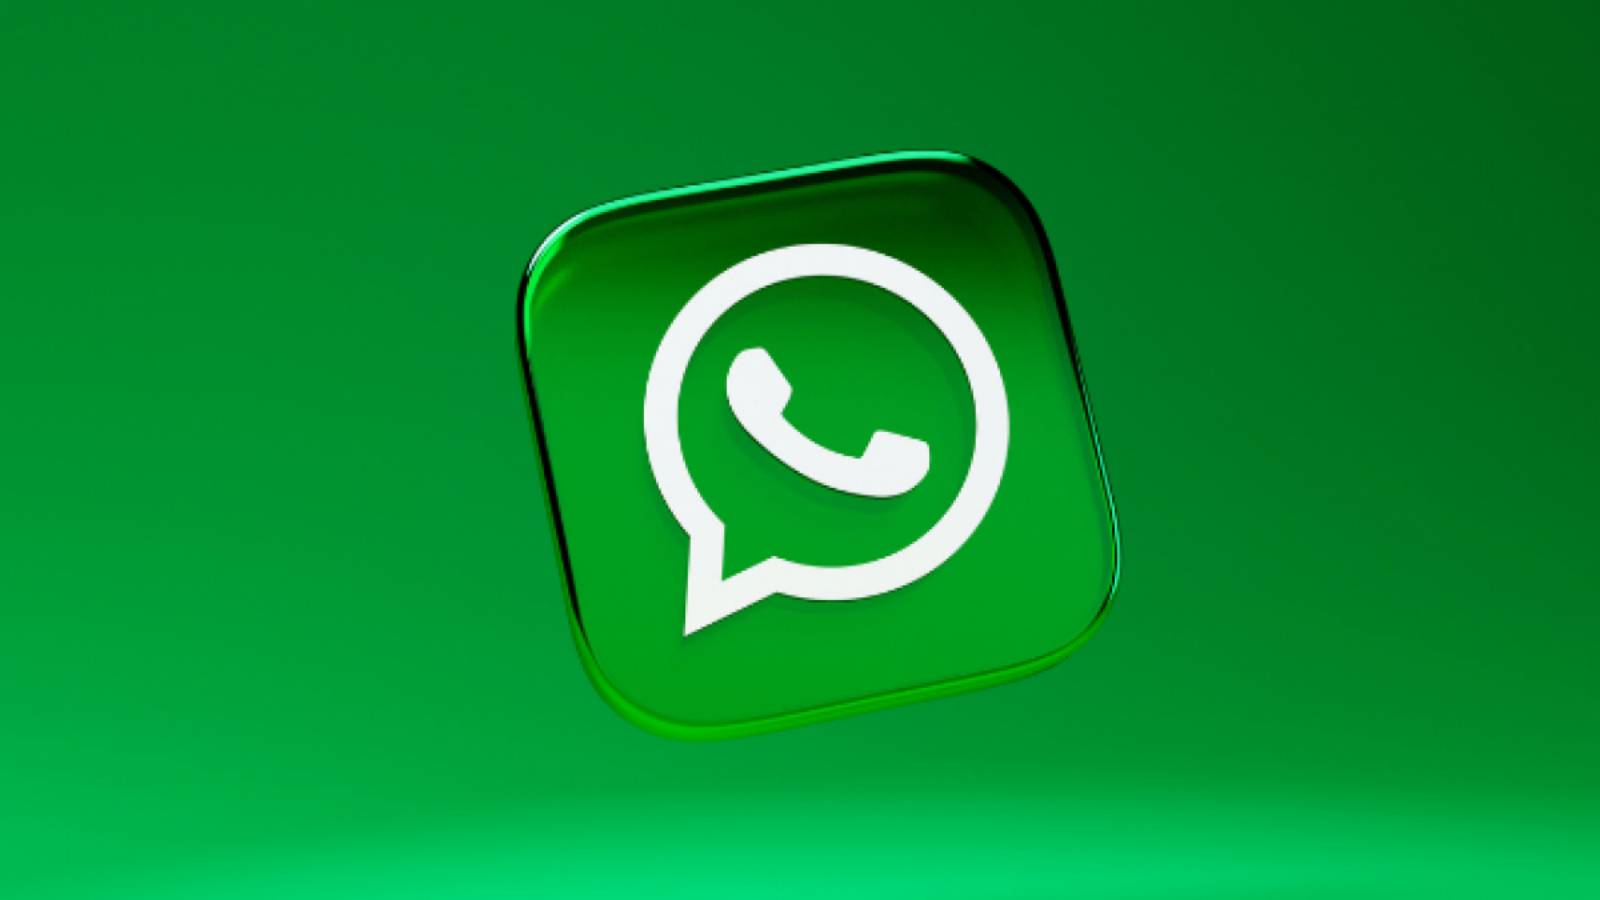 WhatsApp Officially Announces Changes to the iPhone Android Application